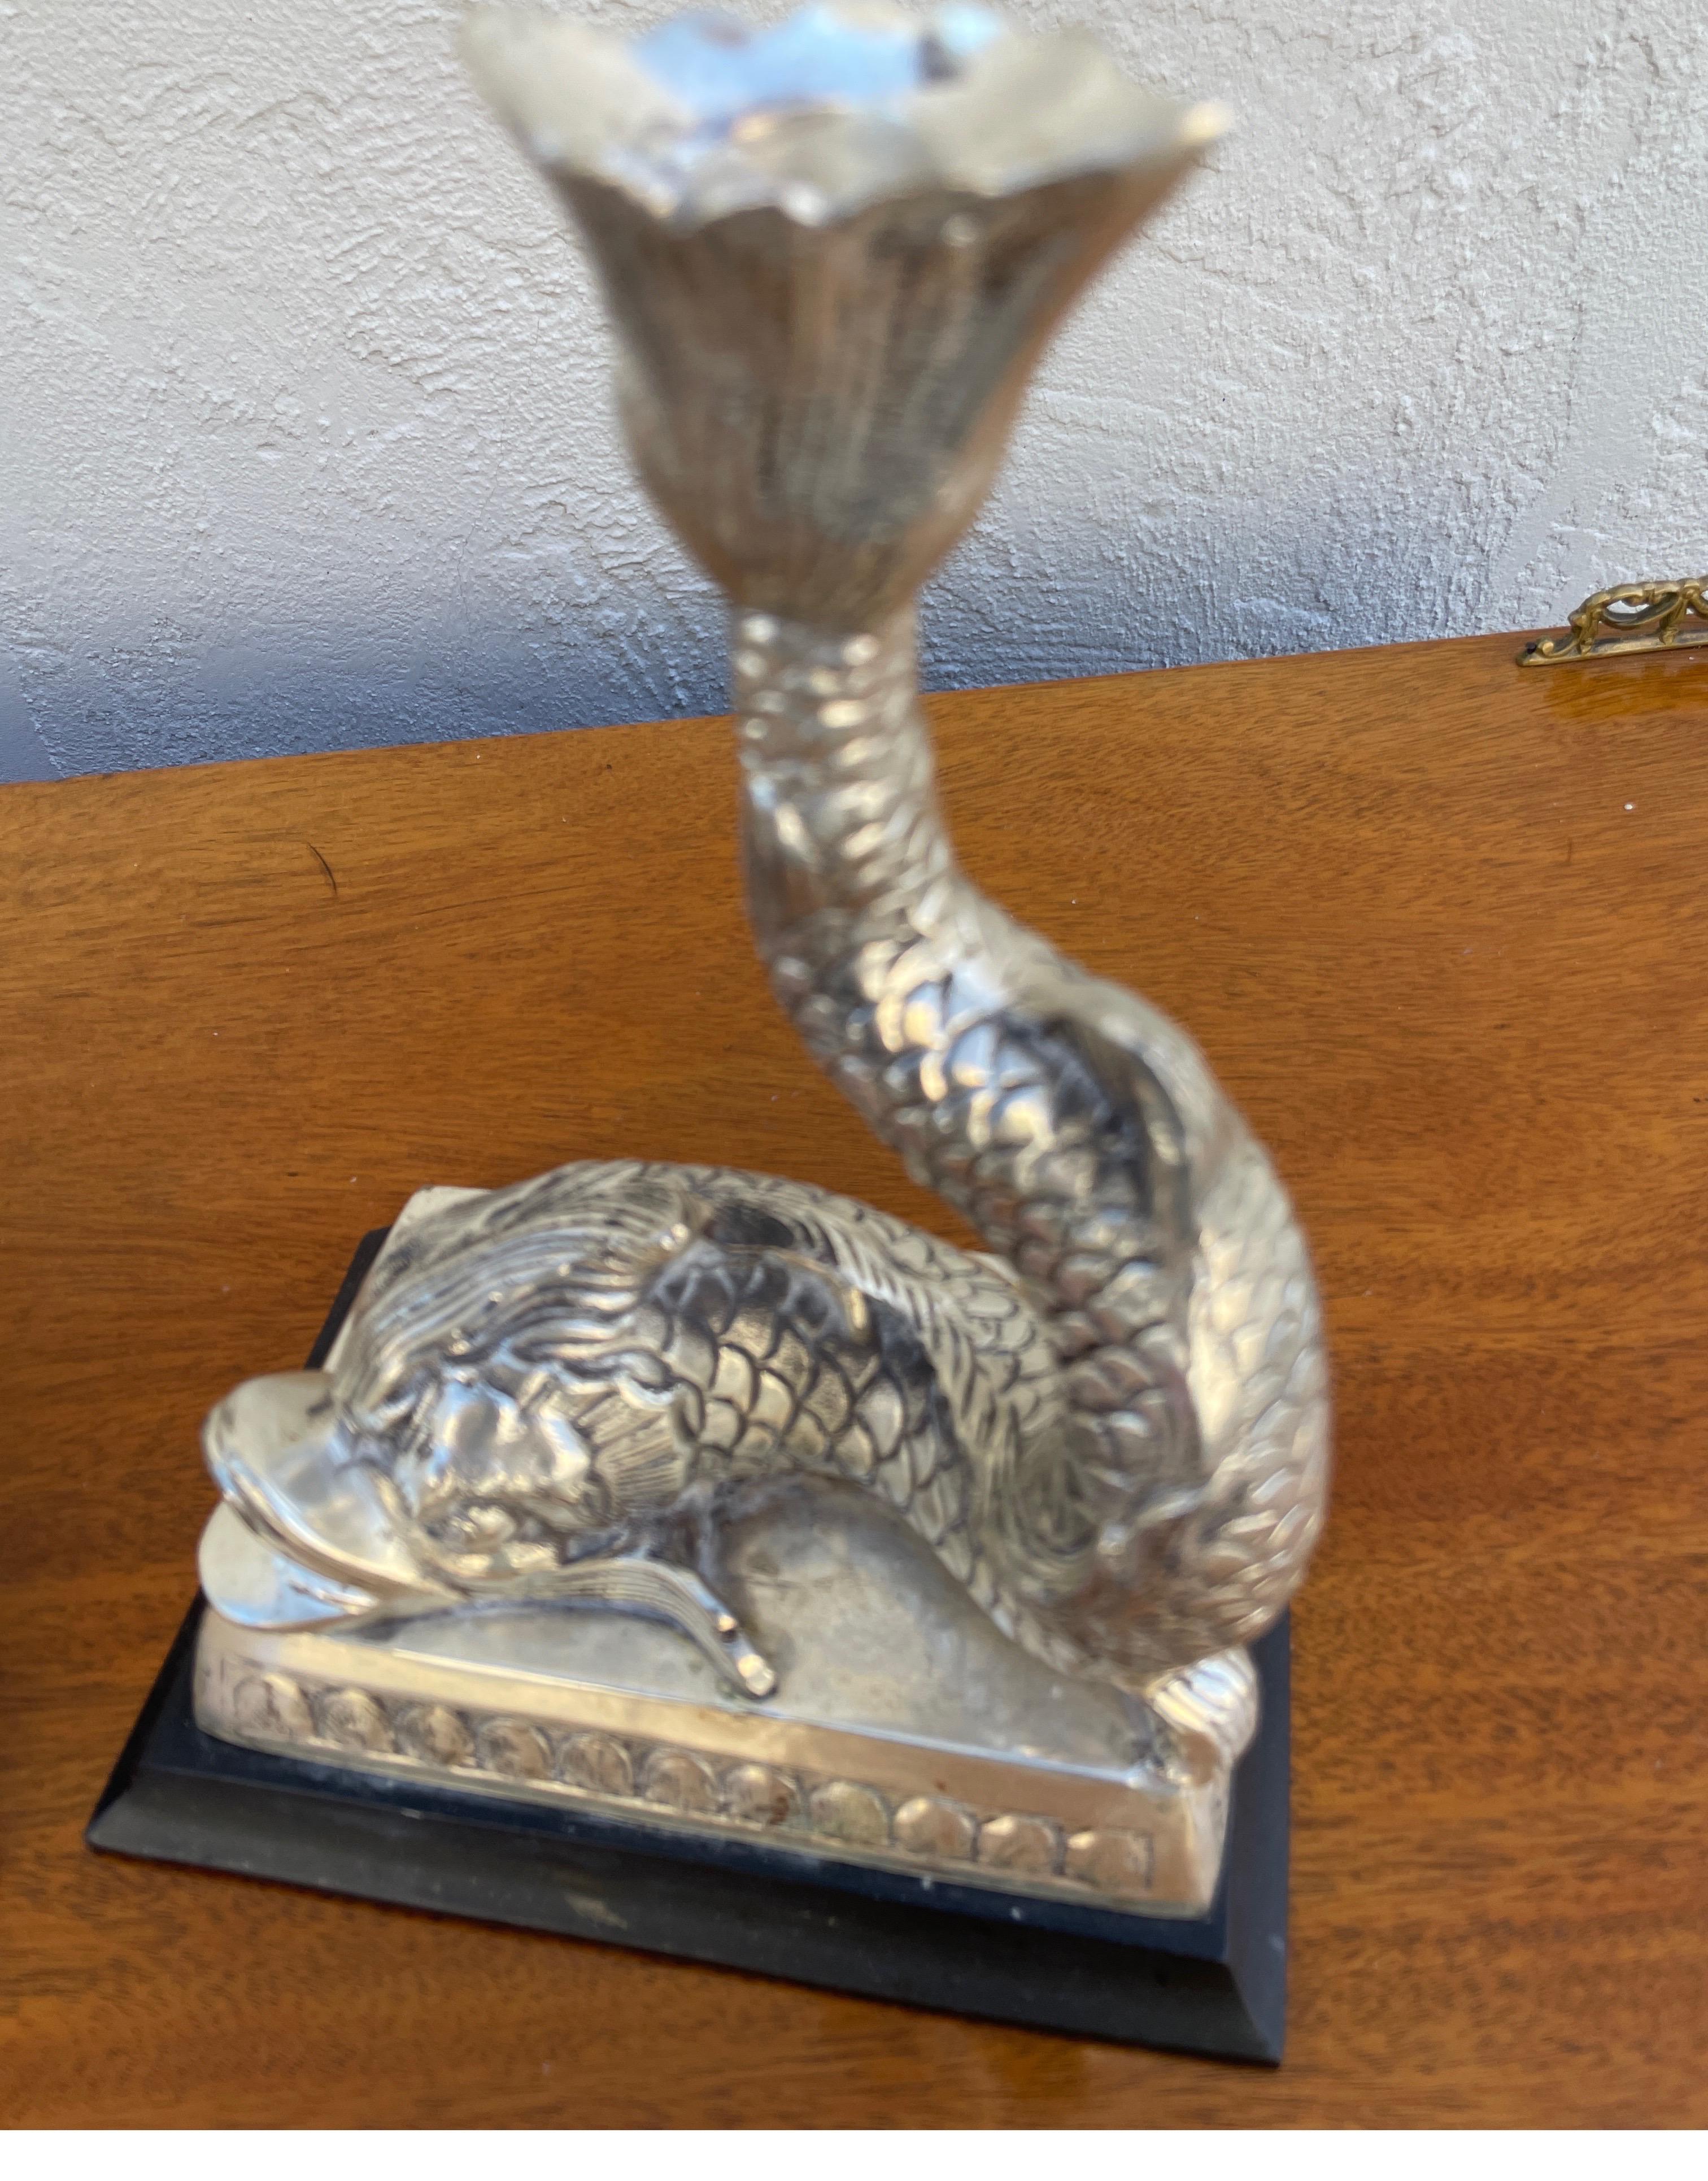 Vintage pair of silver plate opposing Dolphin candlesticks. A lovely addition to any table setting.